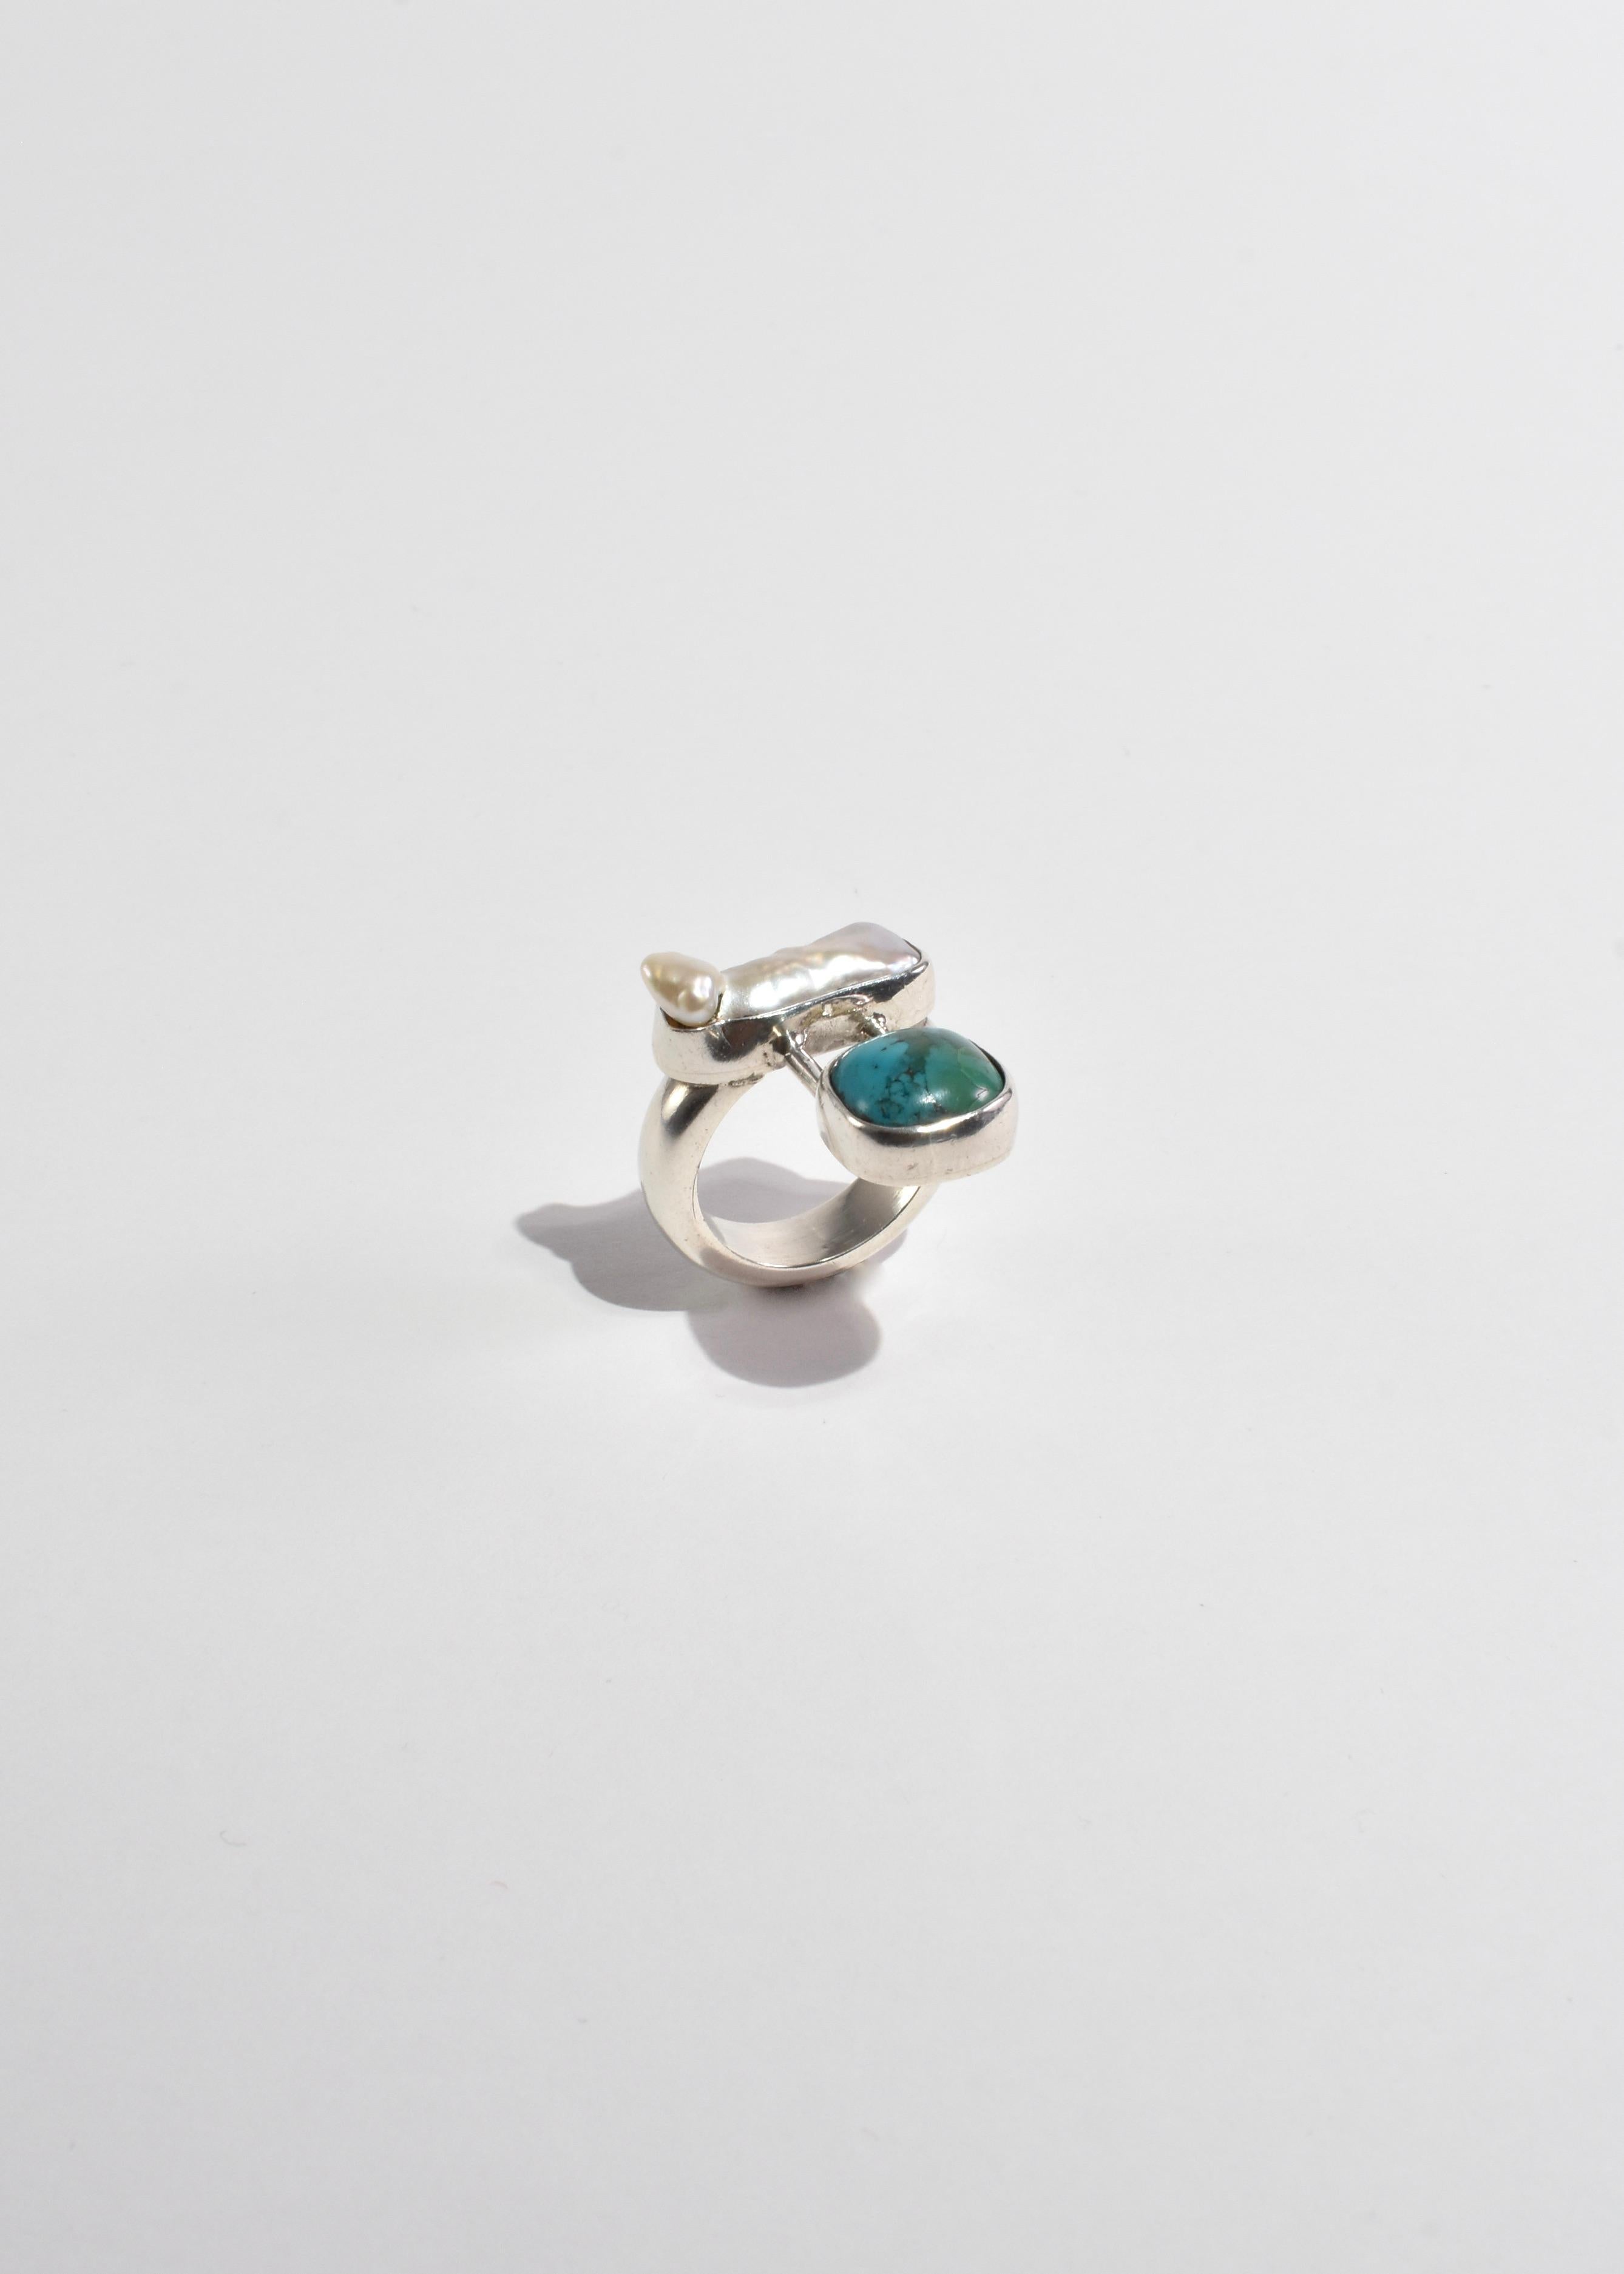 Cabochon Pearl Turquoise Ring For Sale